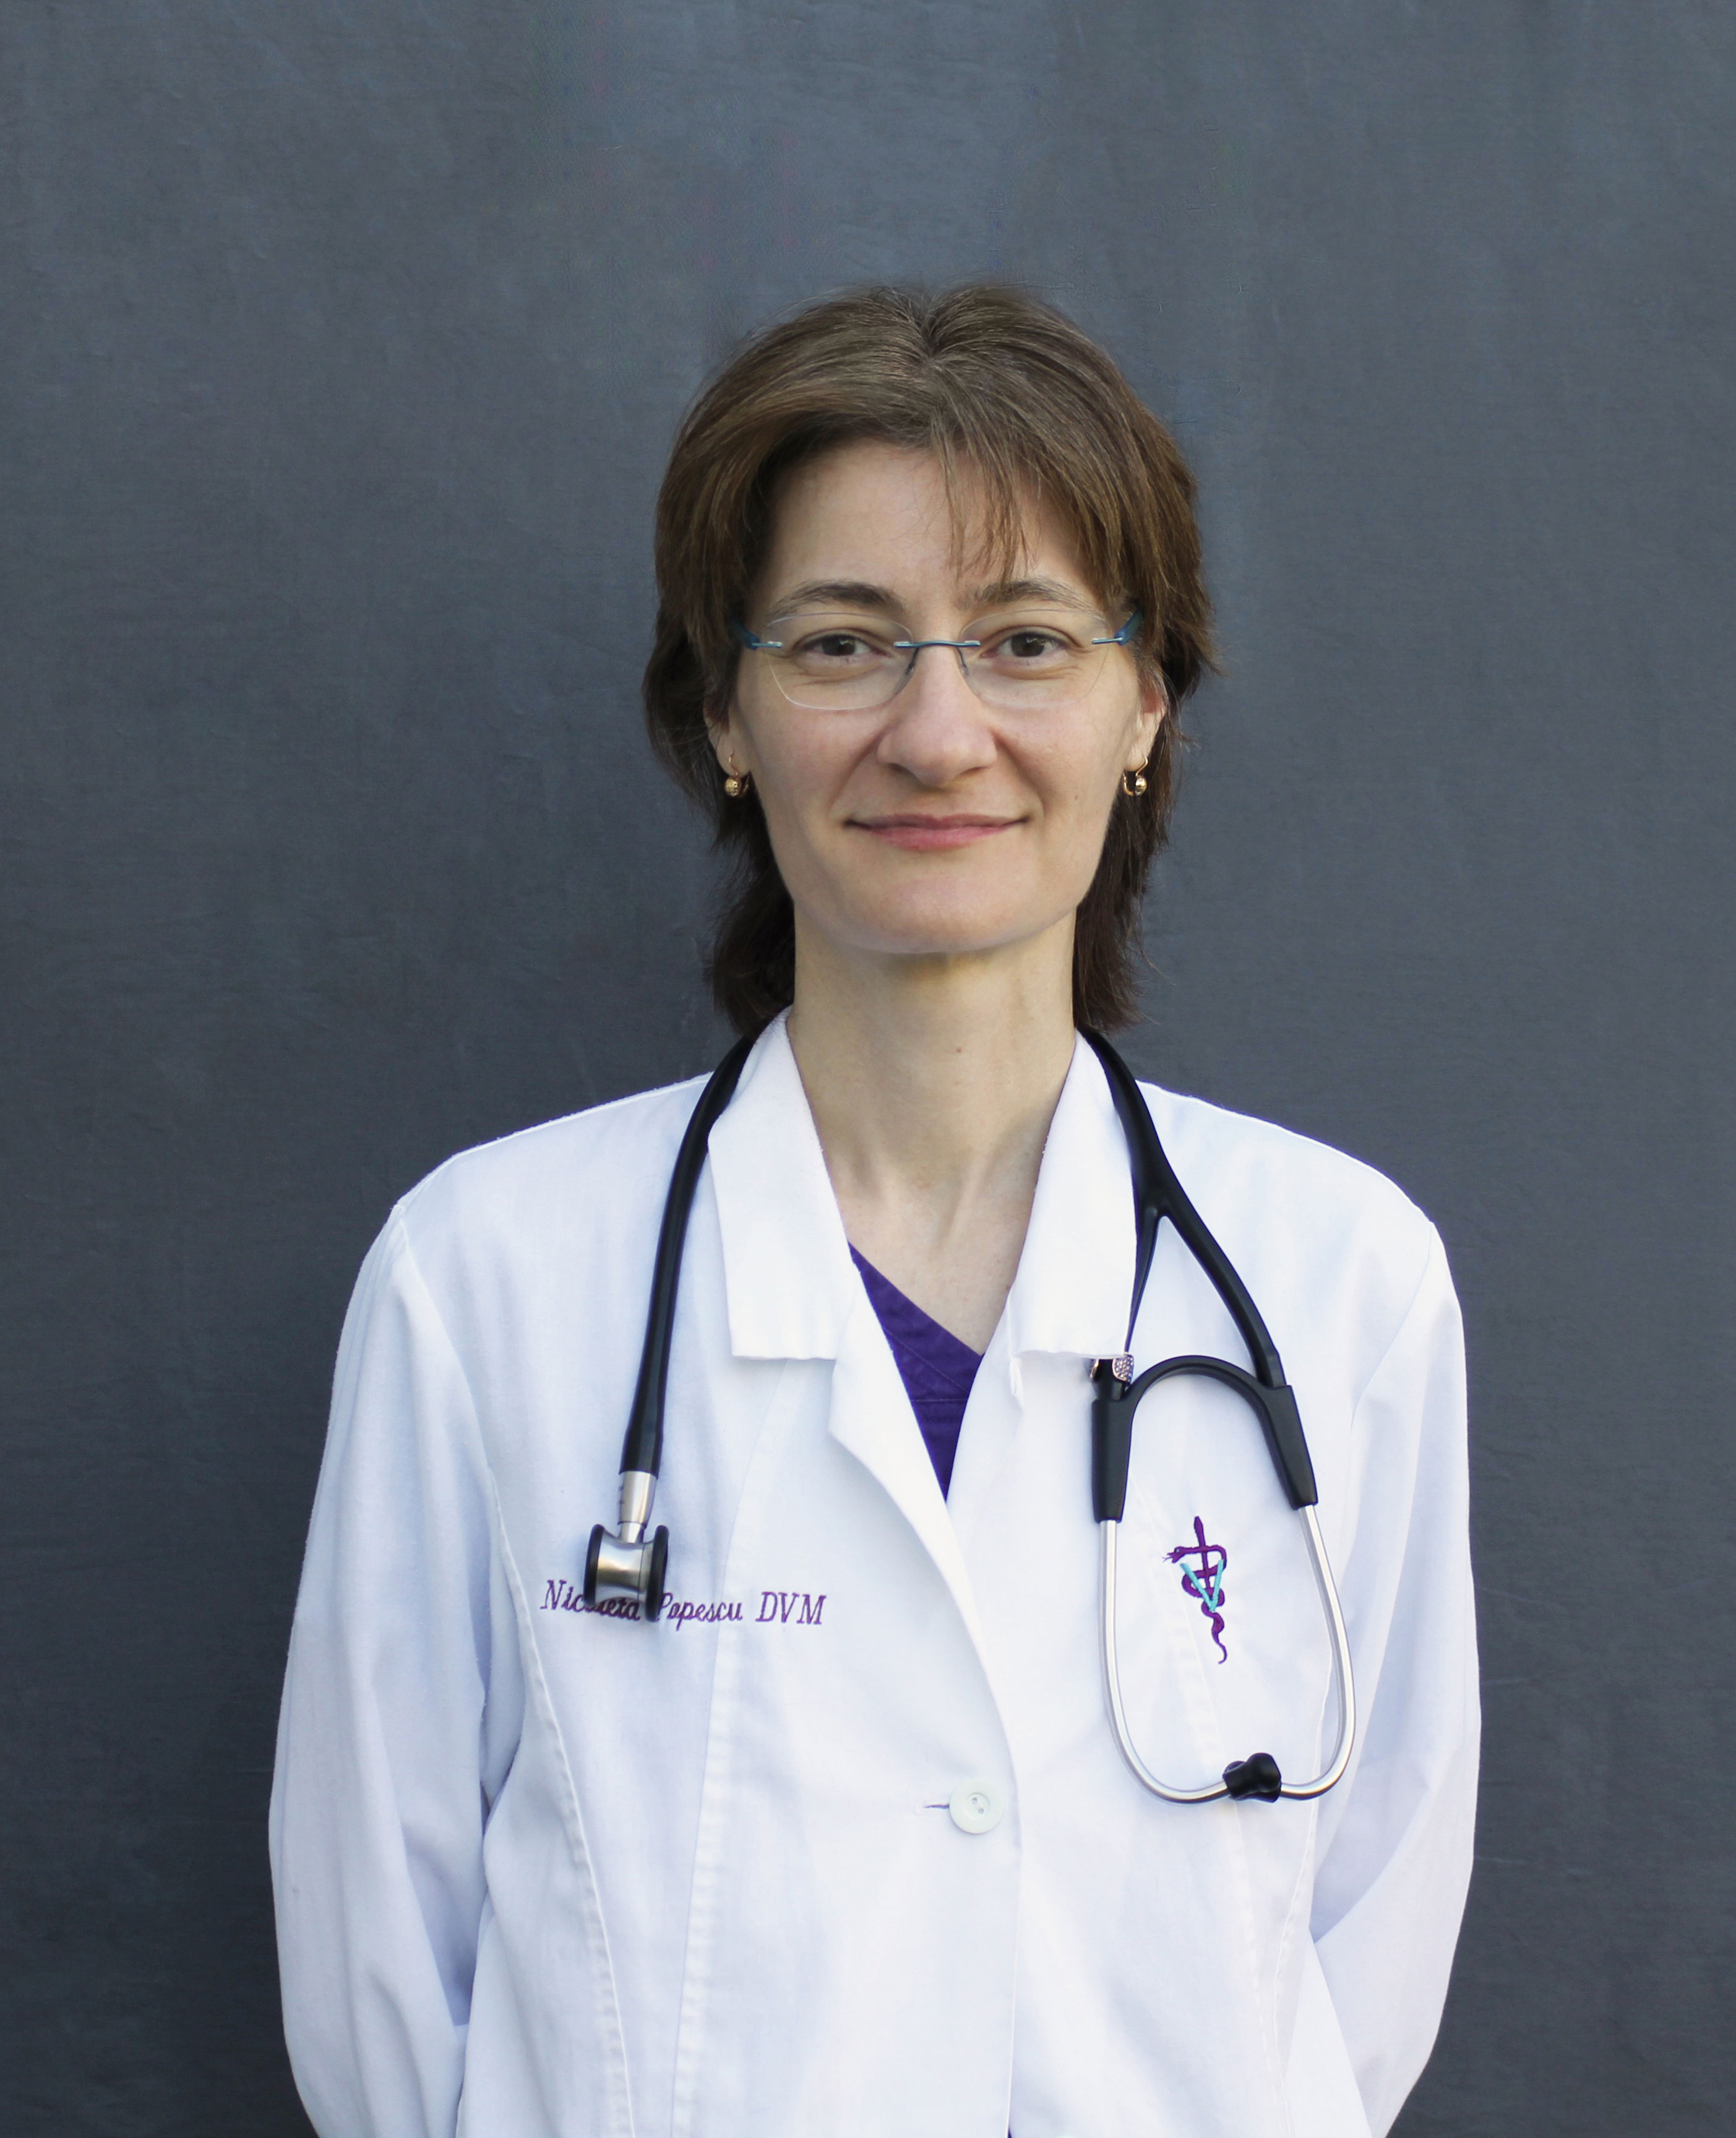 Dr. Nicoleta Popescu, a tall, slim female veterinarian with short light brown hair smiles at the camera in a white lab coat.